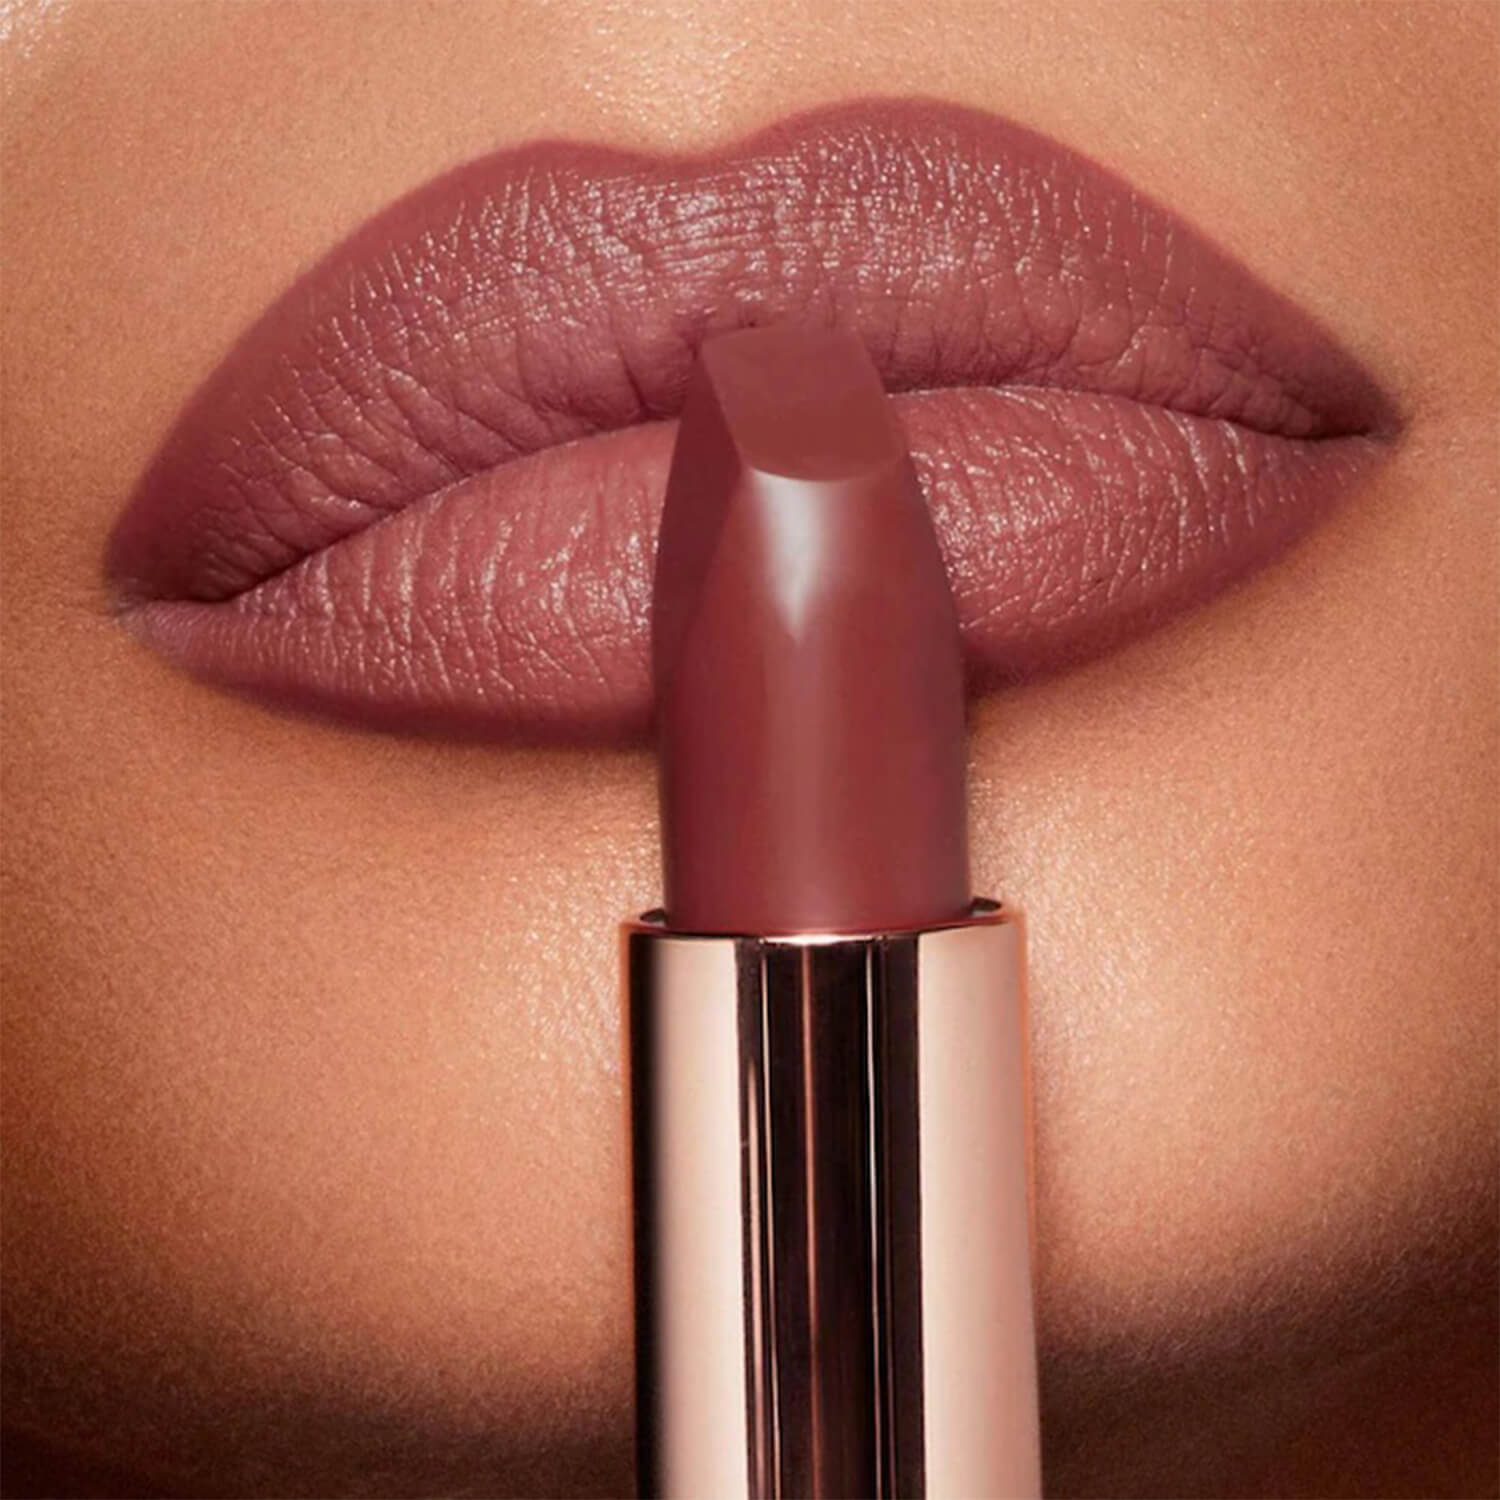 Swatch of Charlotte Tilbury lipstick in pillow talk medium shade available at Heygirl.pk for delivery in Pakistan.